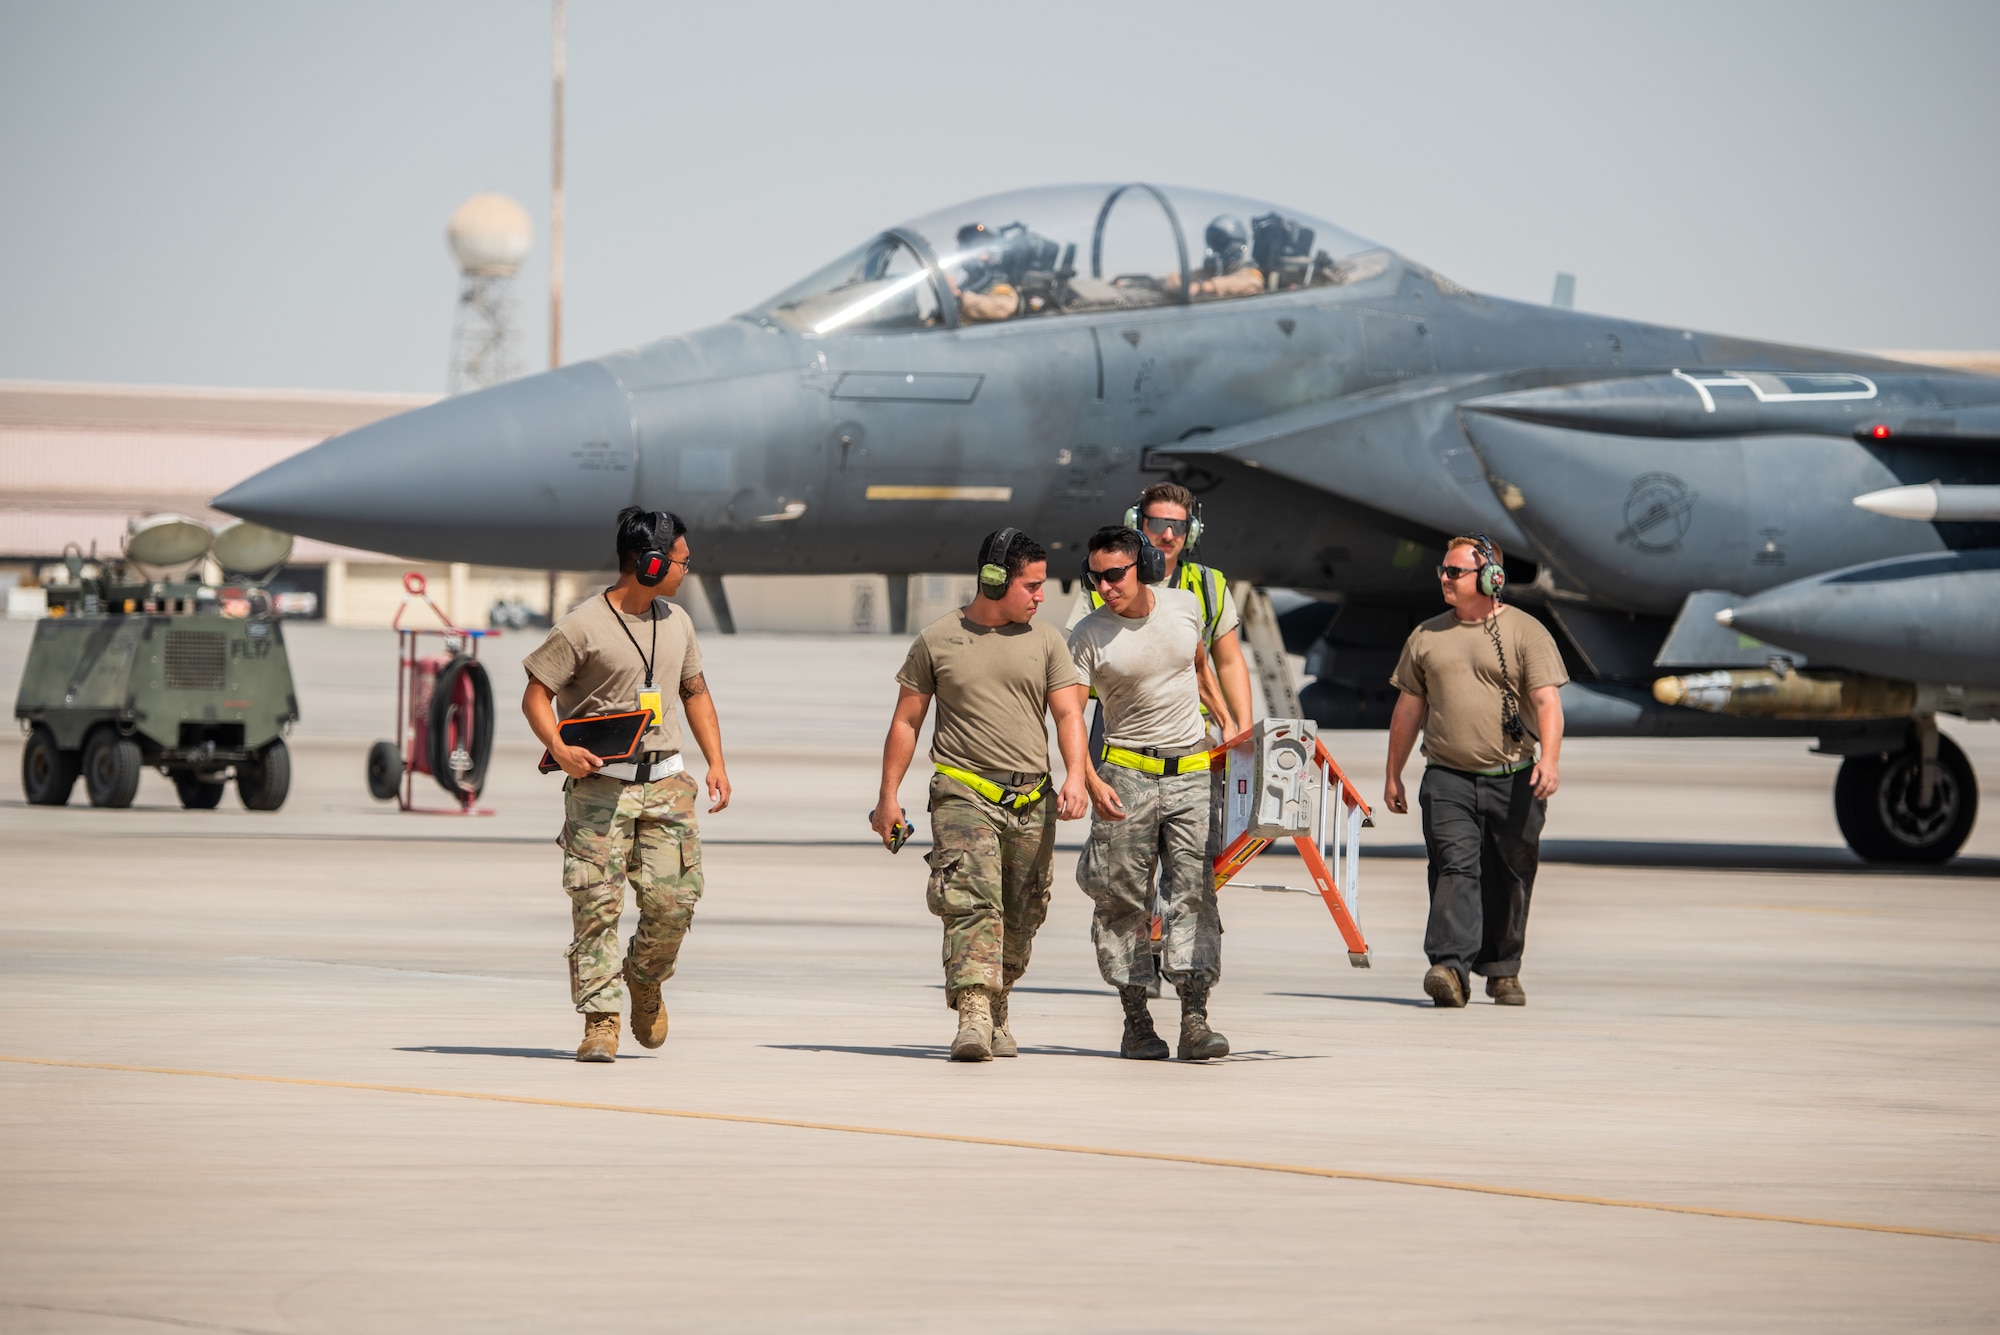 Weapons load crew members walk away from an F-15E Strike Eagle after arming munitions before flight for Agile Strike Sept. 18, 2019, at Al Dhafra Air Base, United Arab Emirates. The 336th EFS sent two aircraft and personnel to operate missions out of Prince Sultan Air Base, Saudi Arabia to challenge their flexibility at expanding tactical and strategic reach while strengthening coalition and regional partnerships in the Air Forces Central Command area of responsibility through adaptive basing. (U.S. Air Force photo by Staff Sgt. Chris Thornbury)